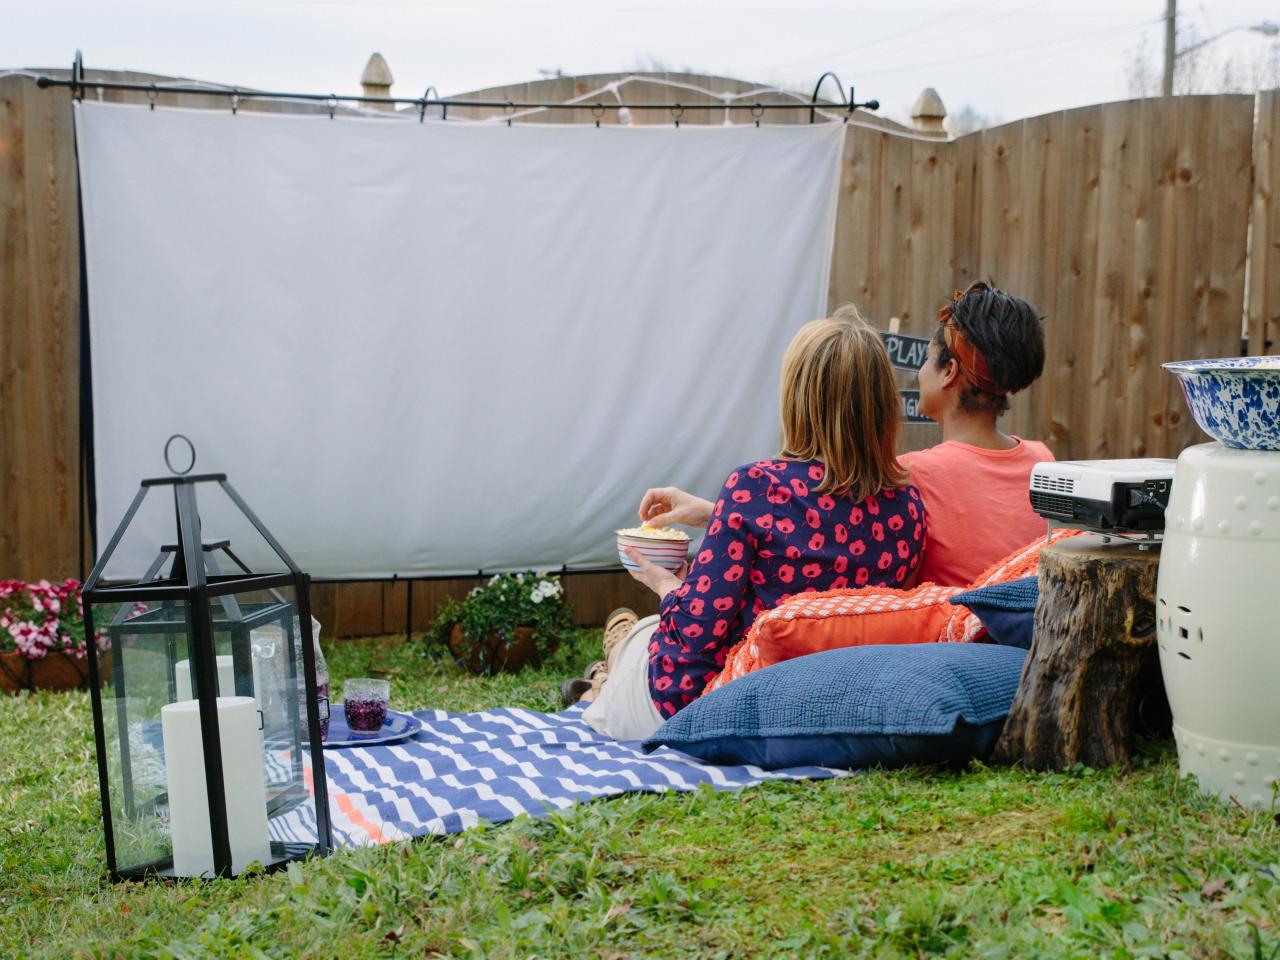 Make An Outdoor Screen, Build Your Own Outdoor Projector Screen